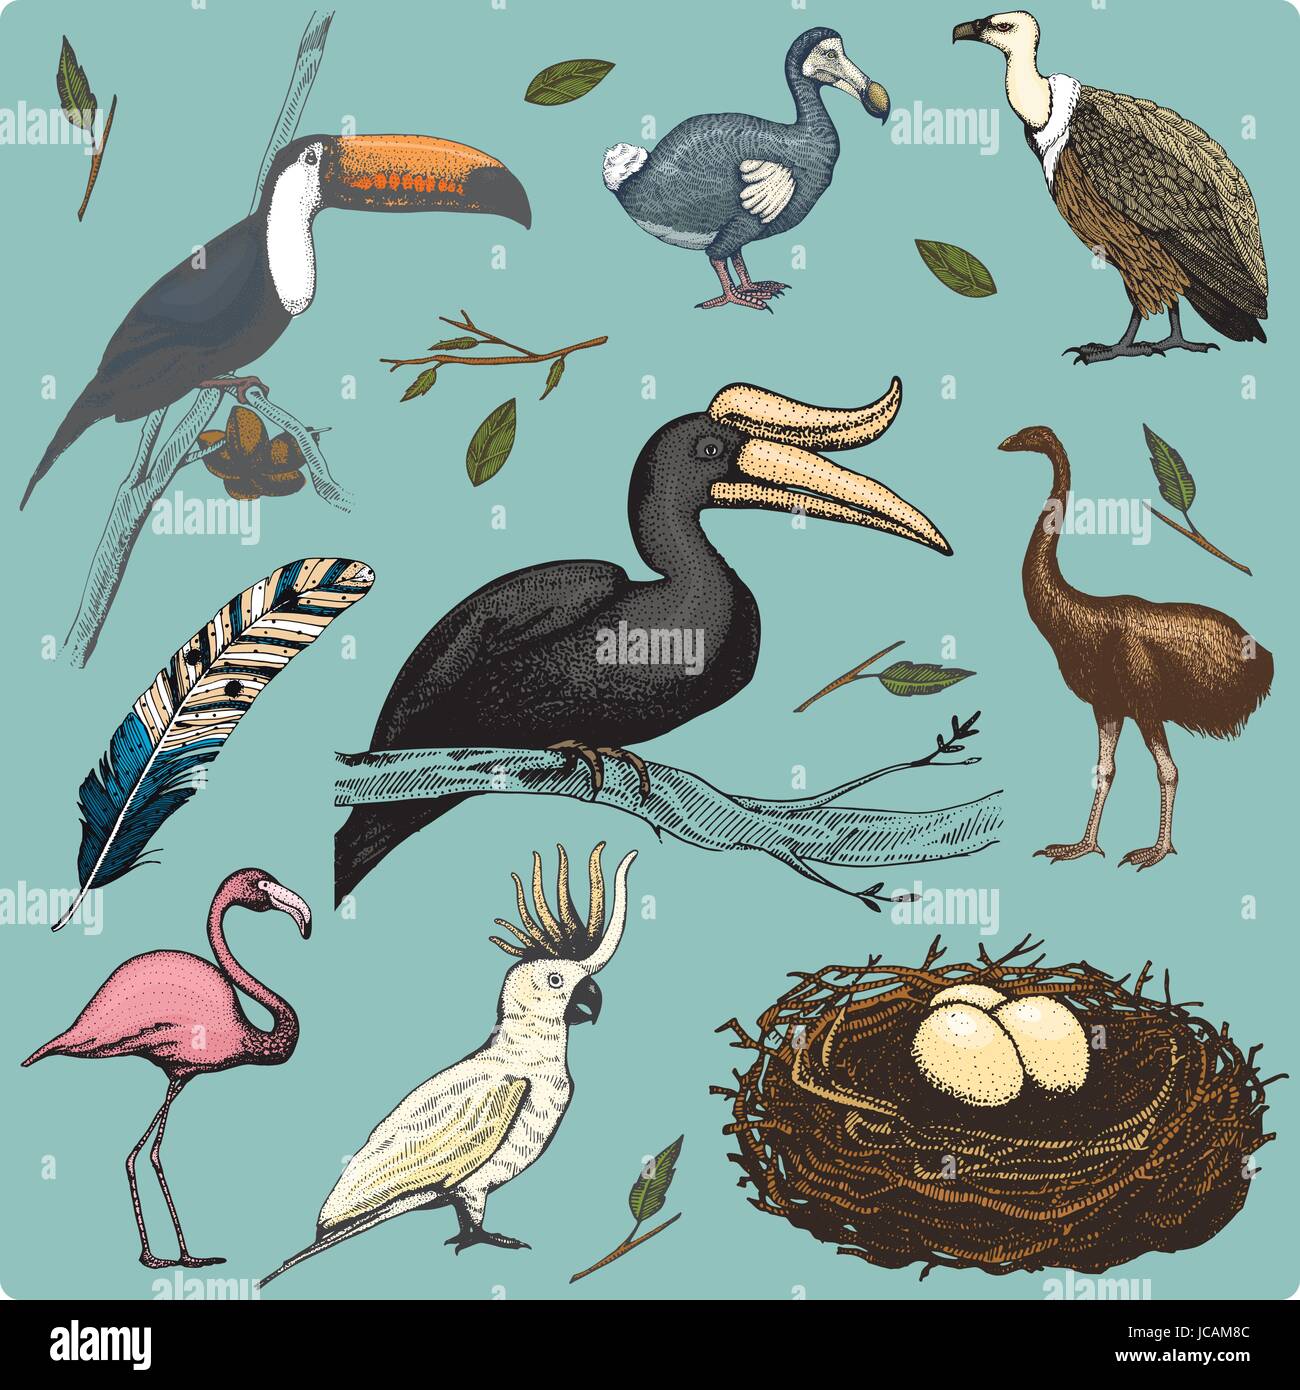 hand drawn vector realistic bird, sketch graphic style, set of domestic. griffon vultures, cockatoo parrot. rhinoceros hornbill, toco toucan, flamingo and extinct species. moa, dodo and feather. Stock Vector